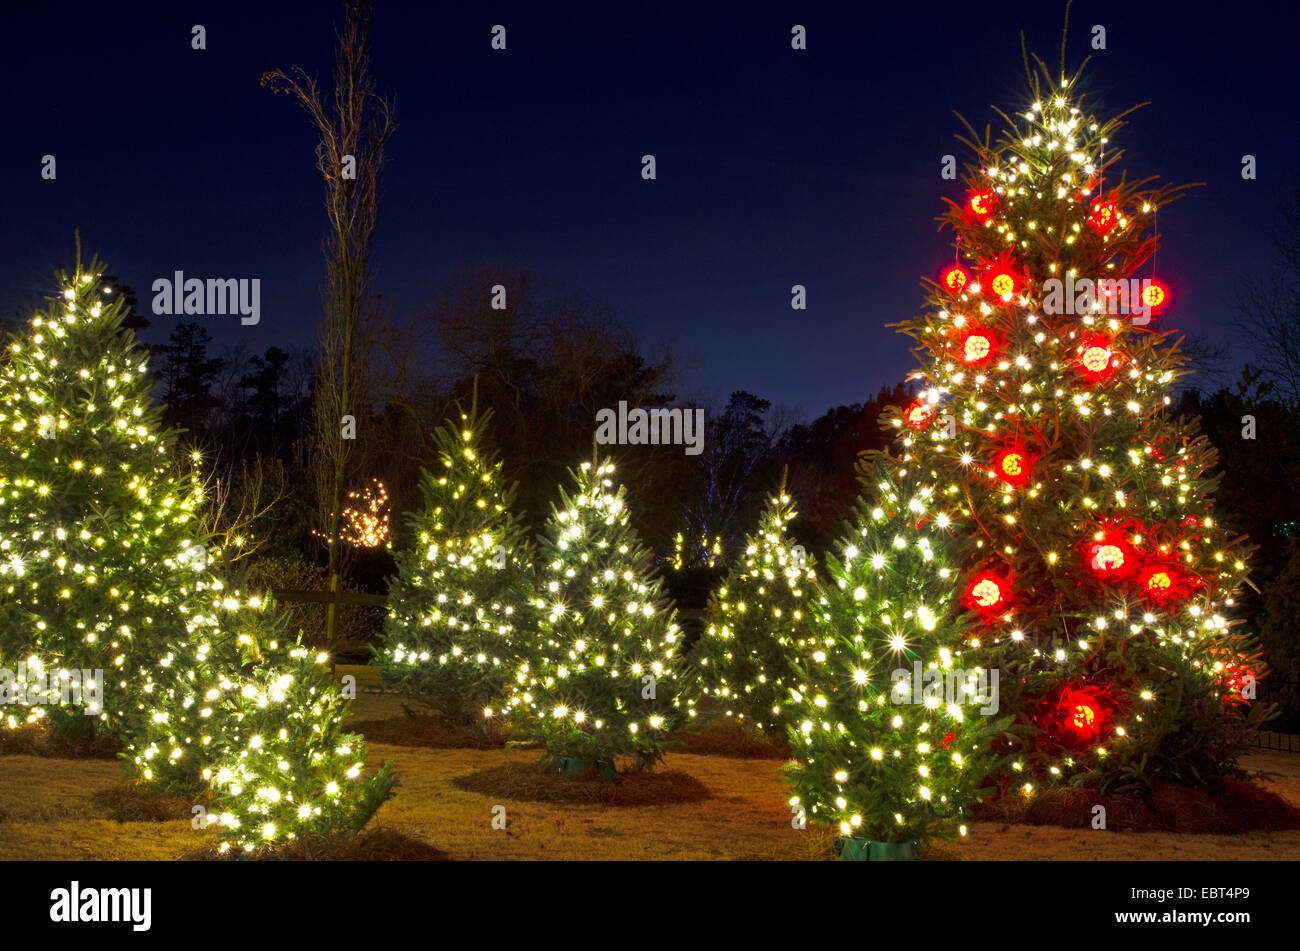 Outdoor Christmas Trees have been decorated with red and white lights Stock Photo, Royalty Free ...